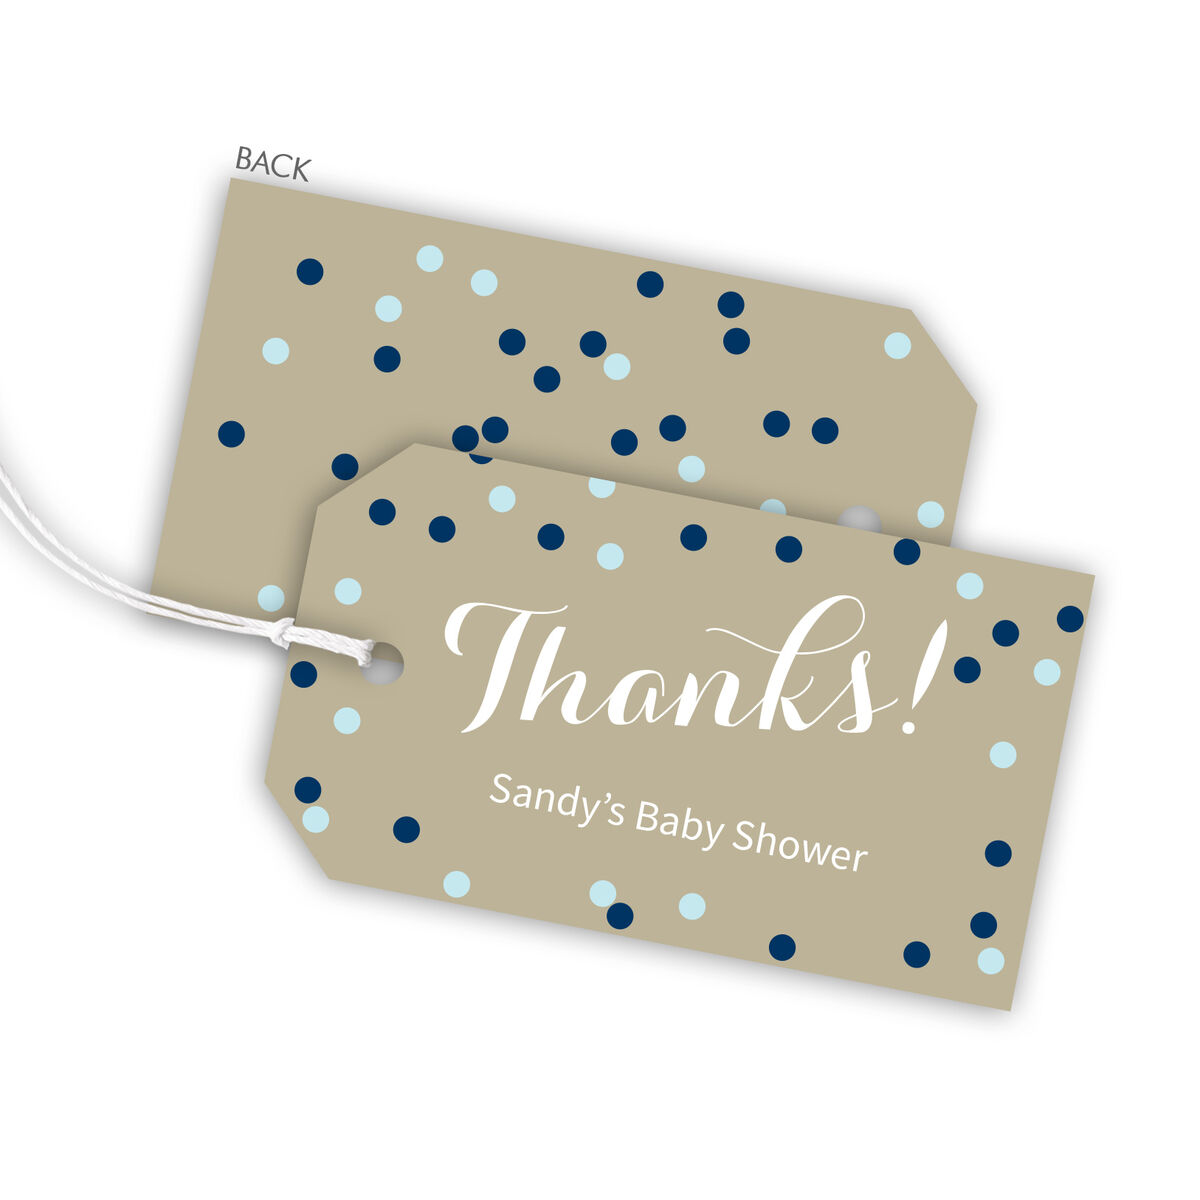 Confetti Horizontal Thank You Hanging Gift Tags with Organza Bags